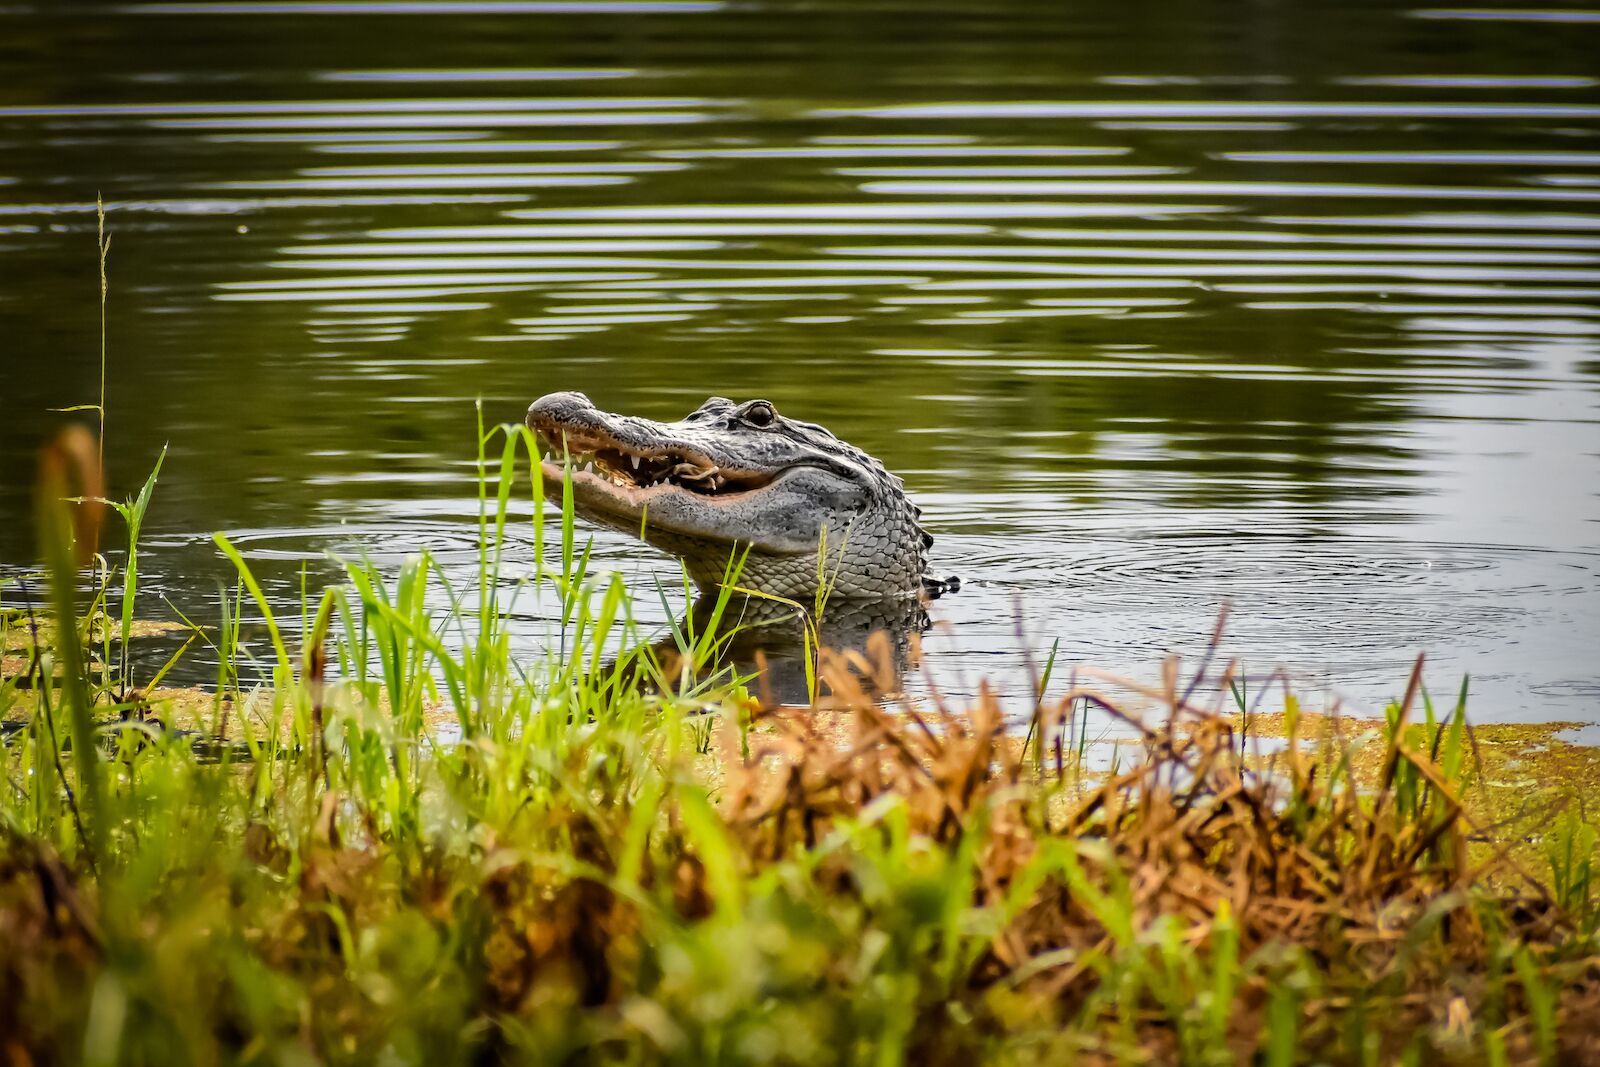 Alligator on the bank of the river in the  Barataria Preserve in New Orleans.  Barataria Preserve is free to access.